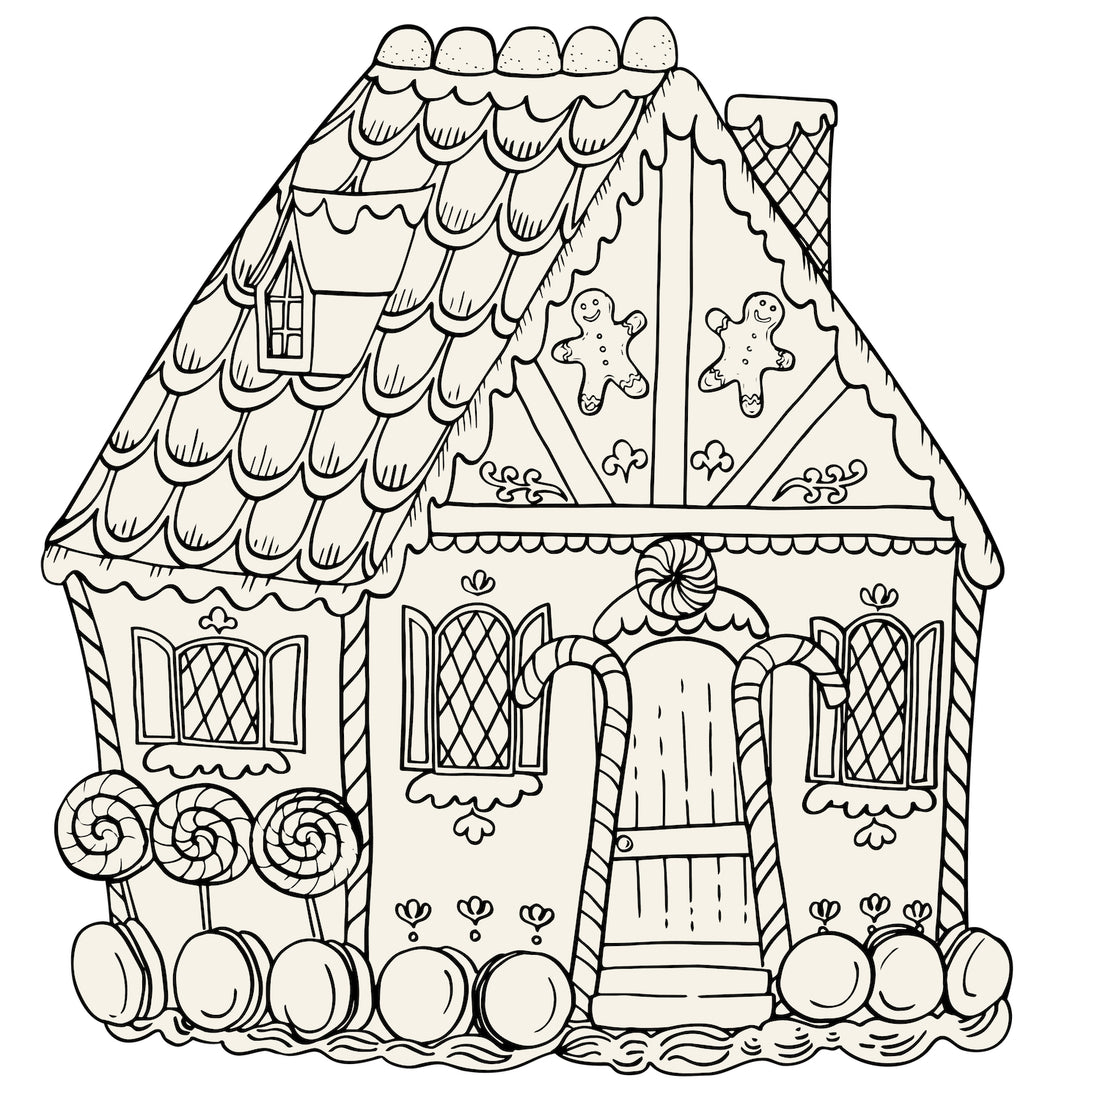 An artwork of a Die-cut Gingerbread House Coloring Placemat by Hester &amp; Cook.